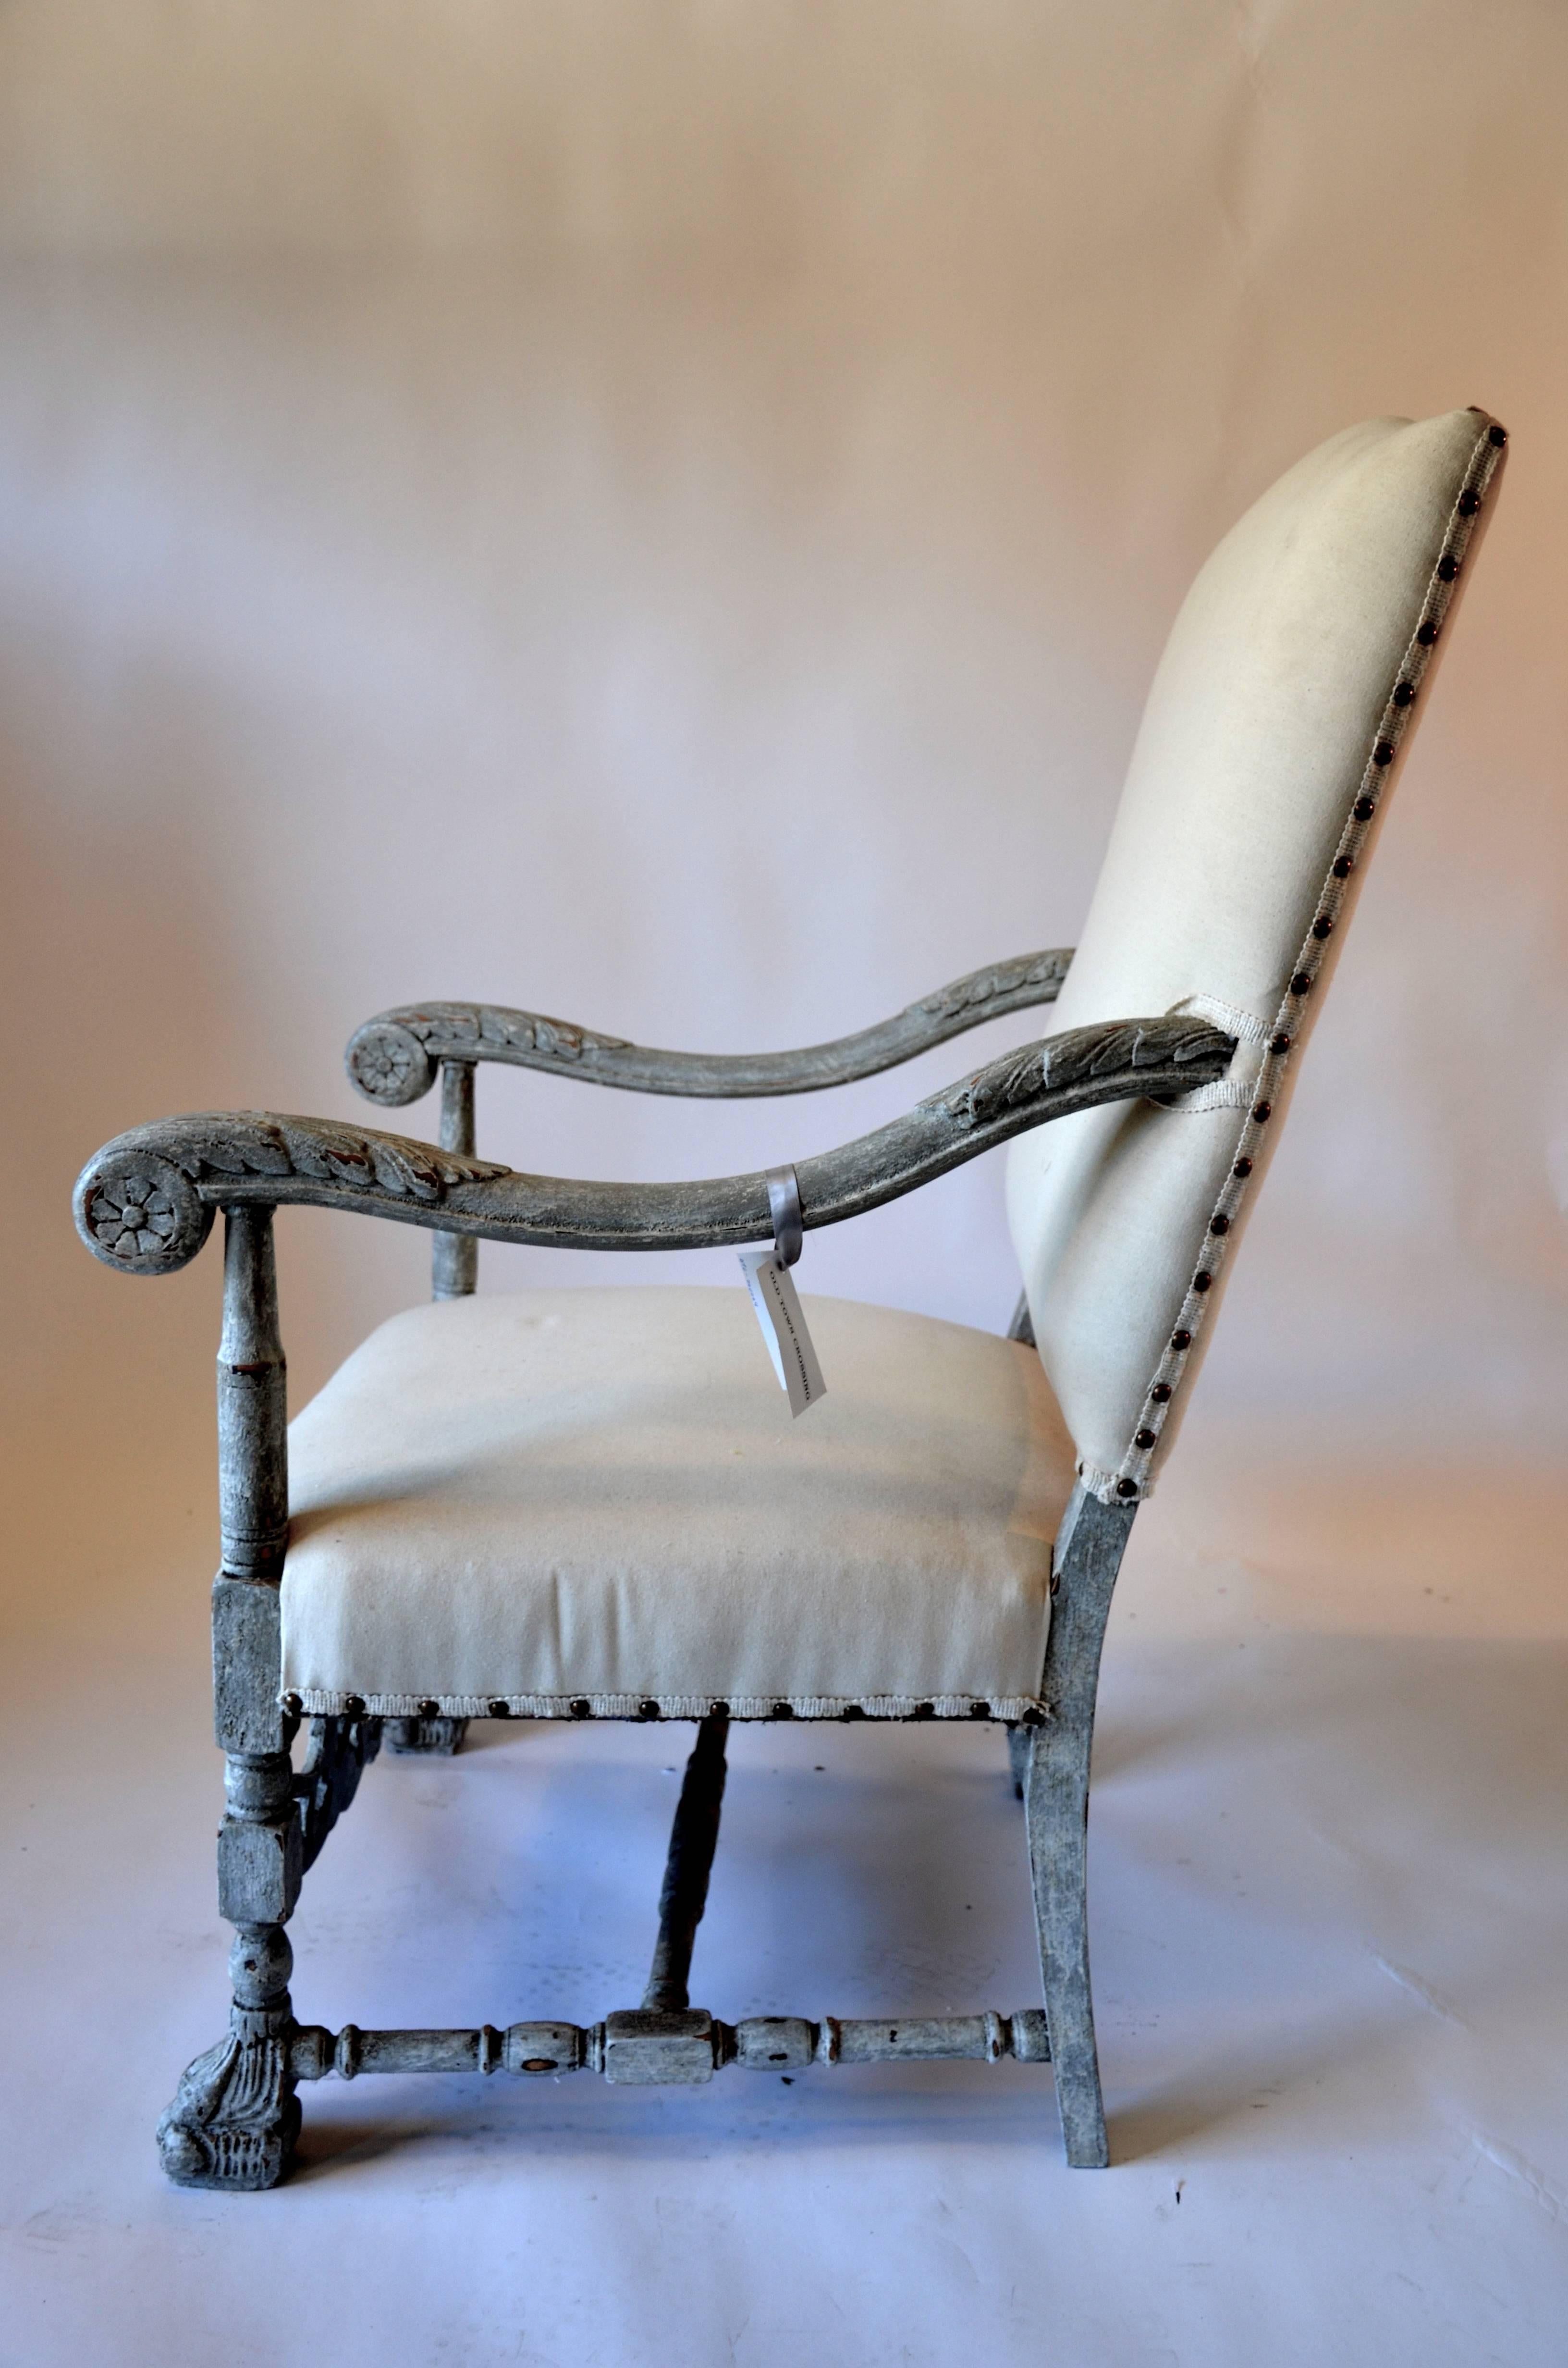 Gustavian finish, exquisite carvings and nailhead detail.